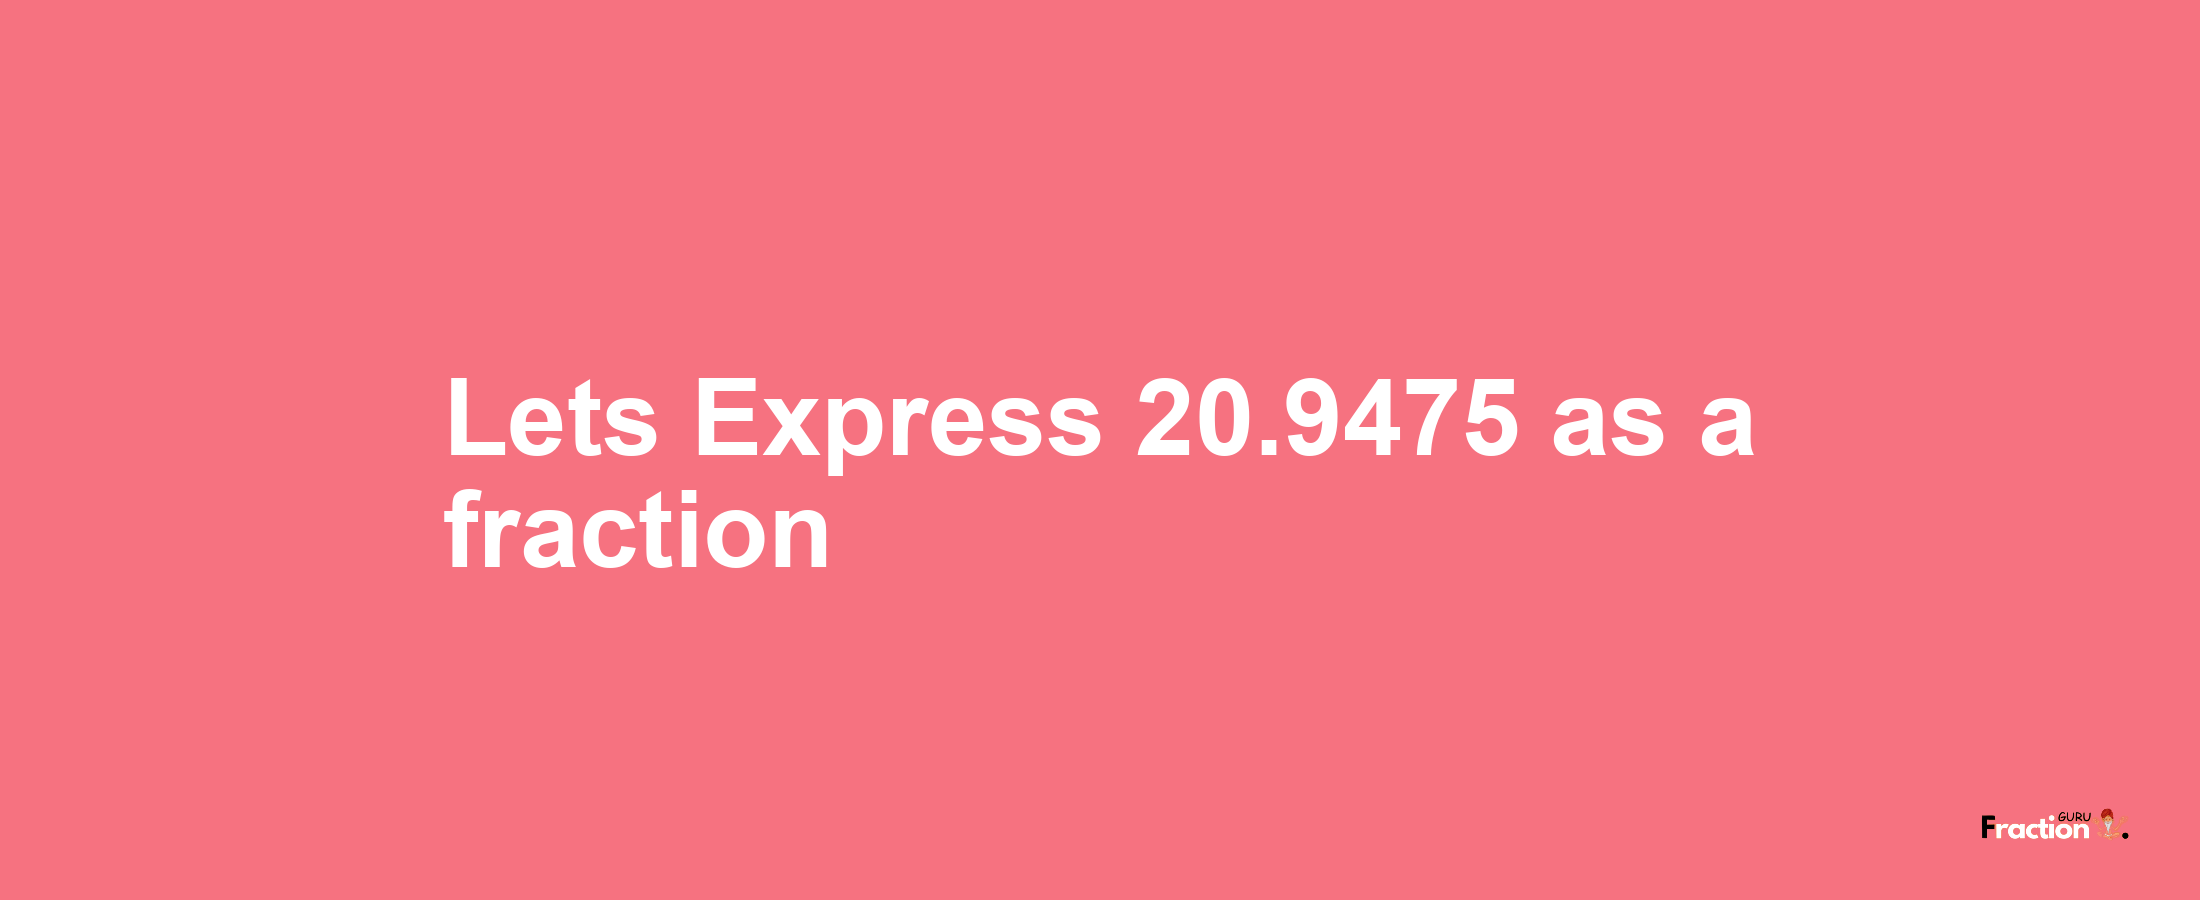 Lets Express 20.9475 as afraction